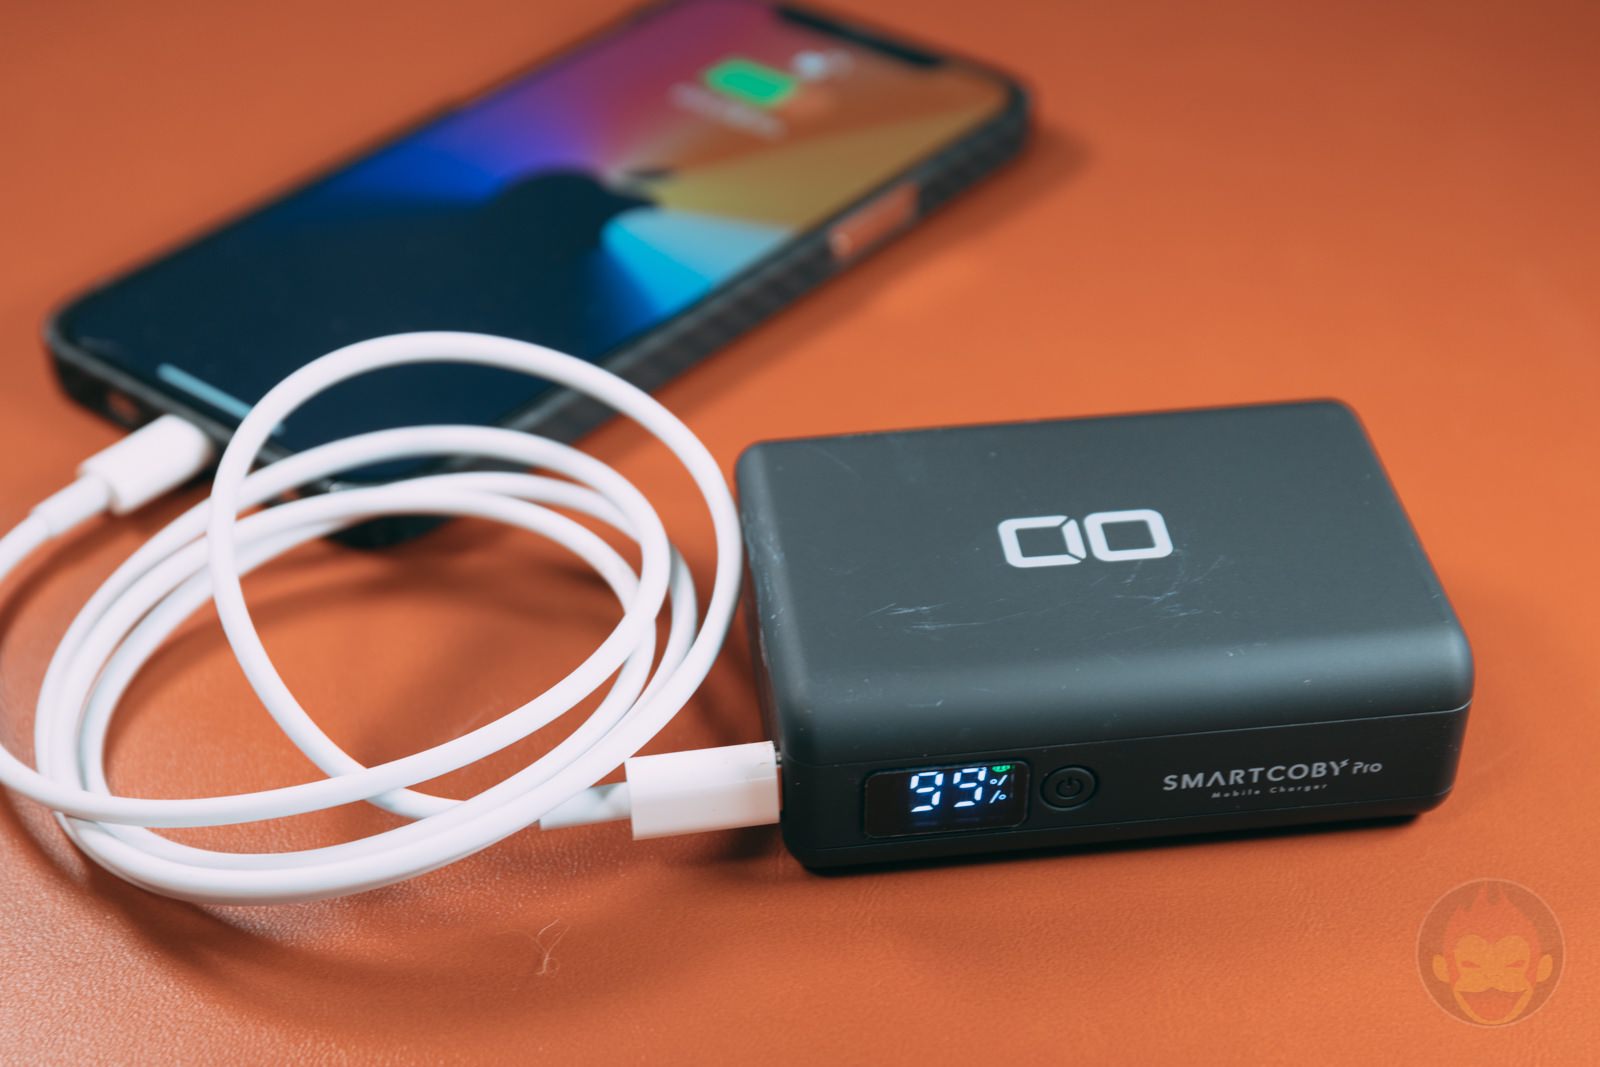 CIO-SMARTCOBY-Pro30W-Mobile-Battery-Review-16.jpg